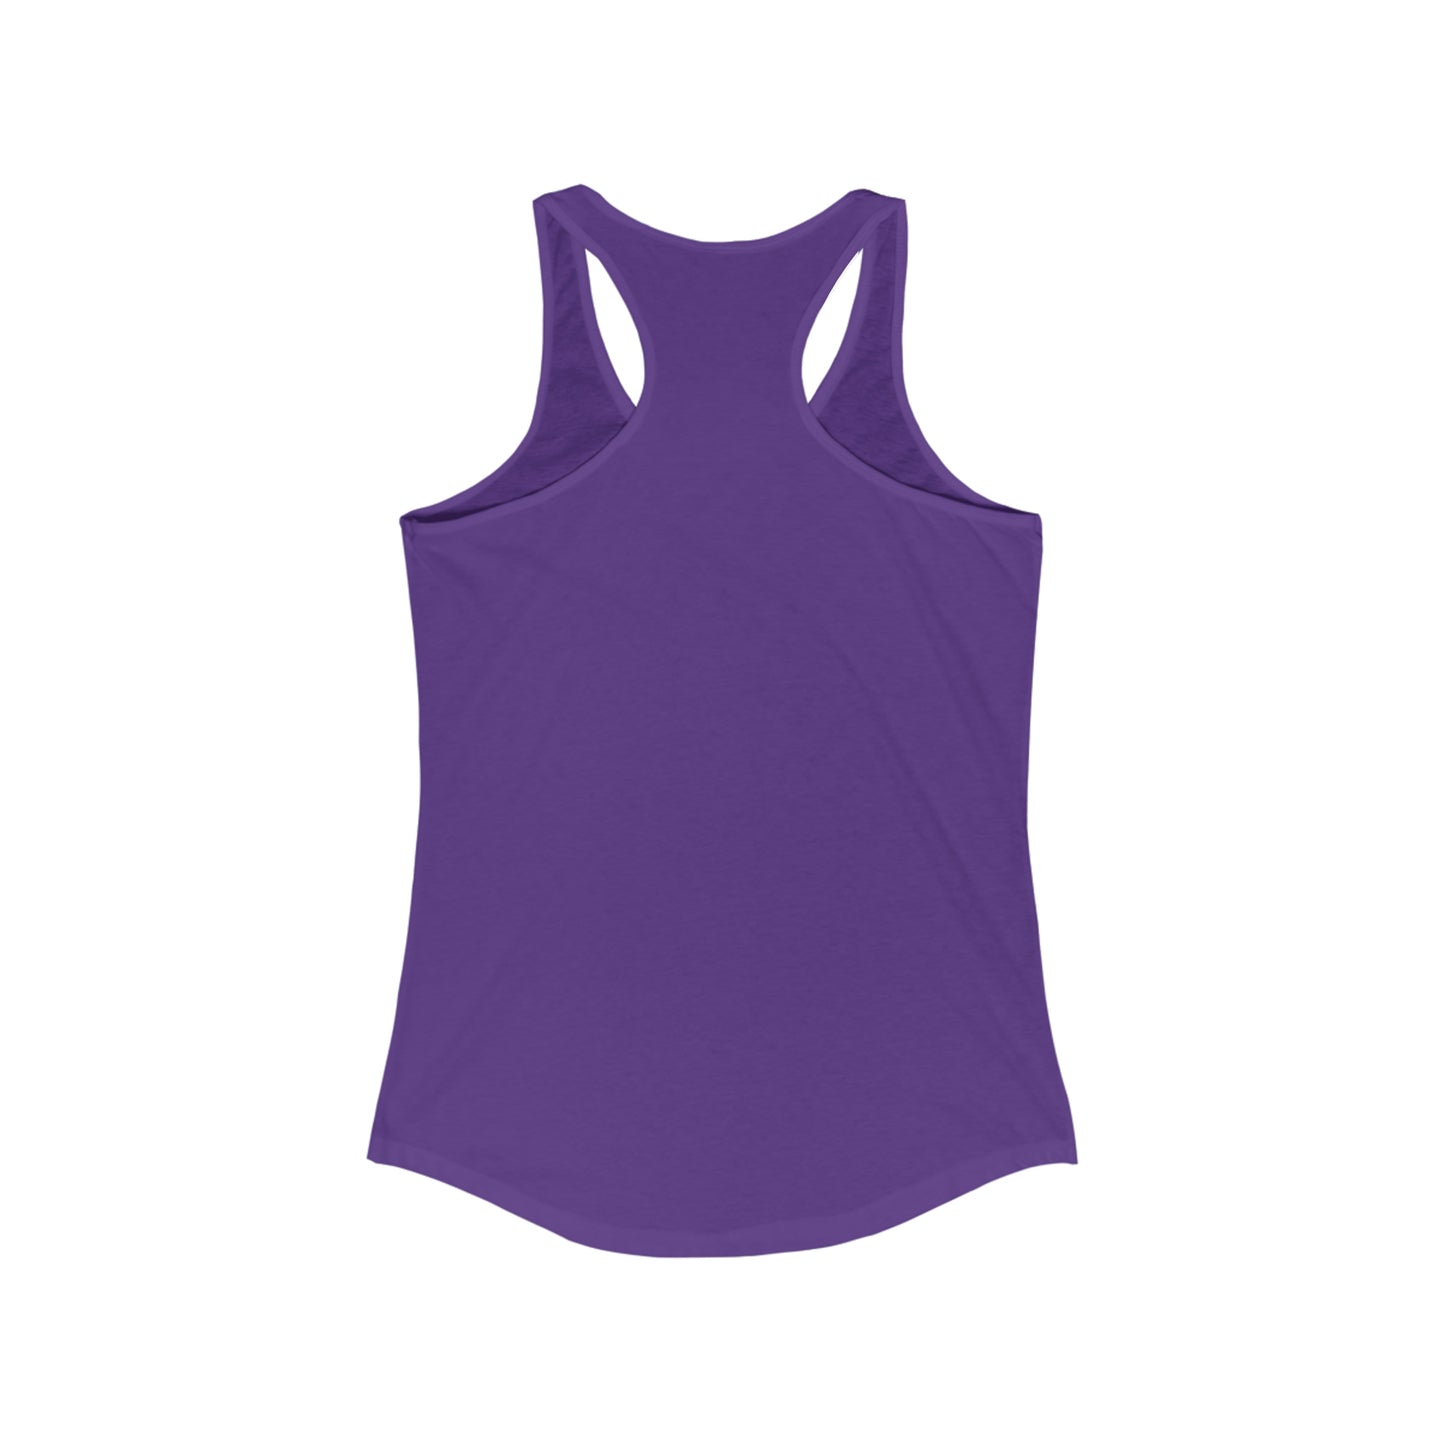 Work until your Signature becomes your Autograph - Women's Ideal Racerback Tank